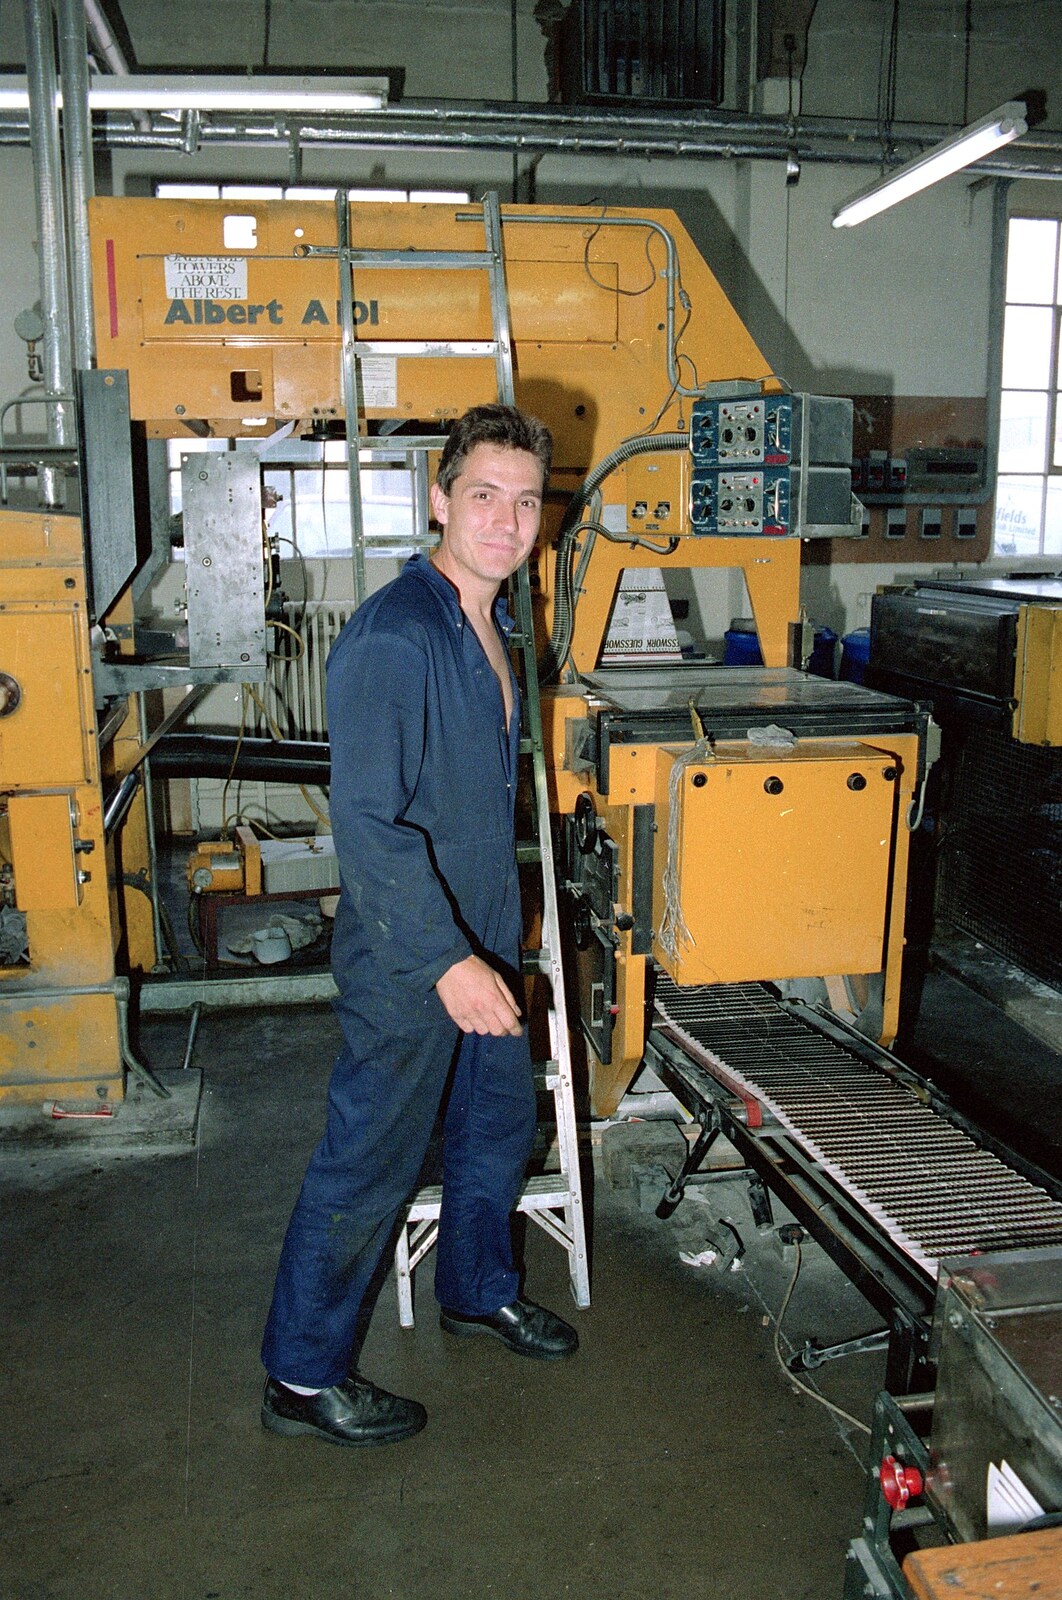 Milling around by the printing press from Nosher Leaves Soman-Wherry Press, Norwich - 3rd August 1988